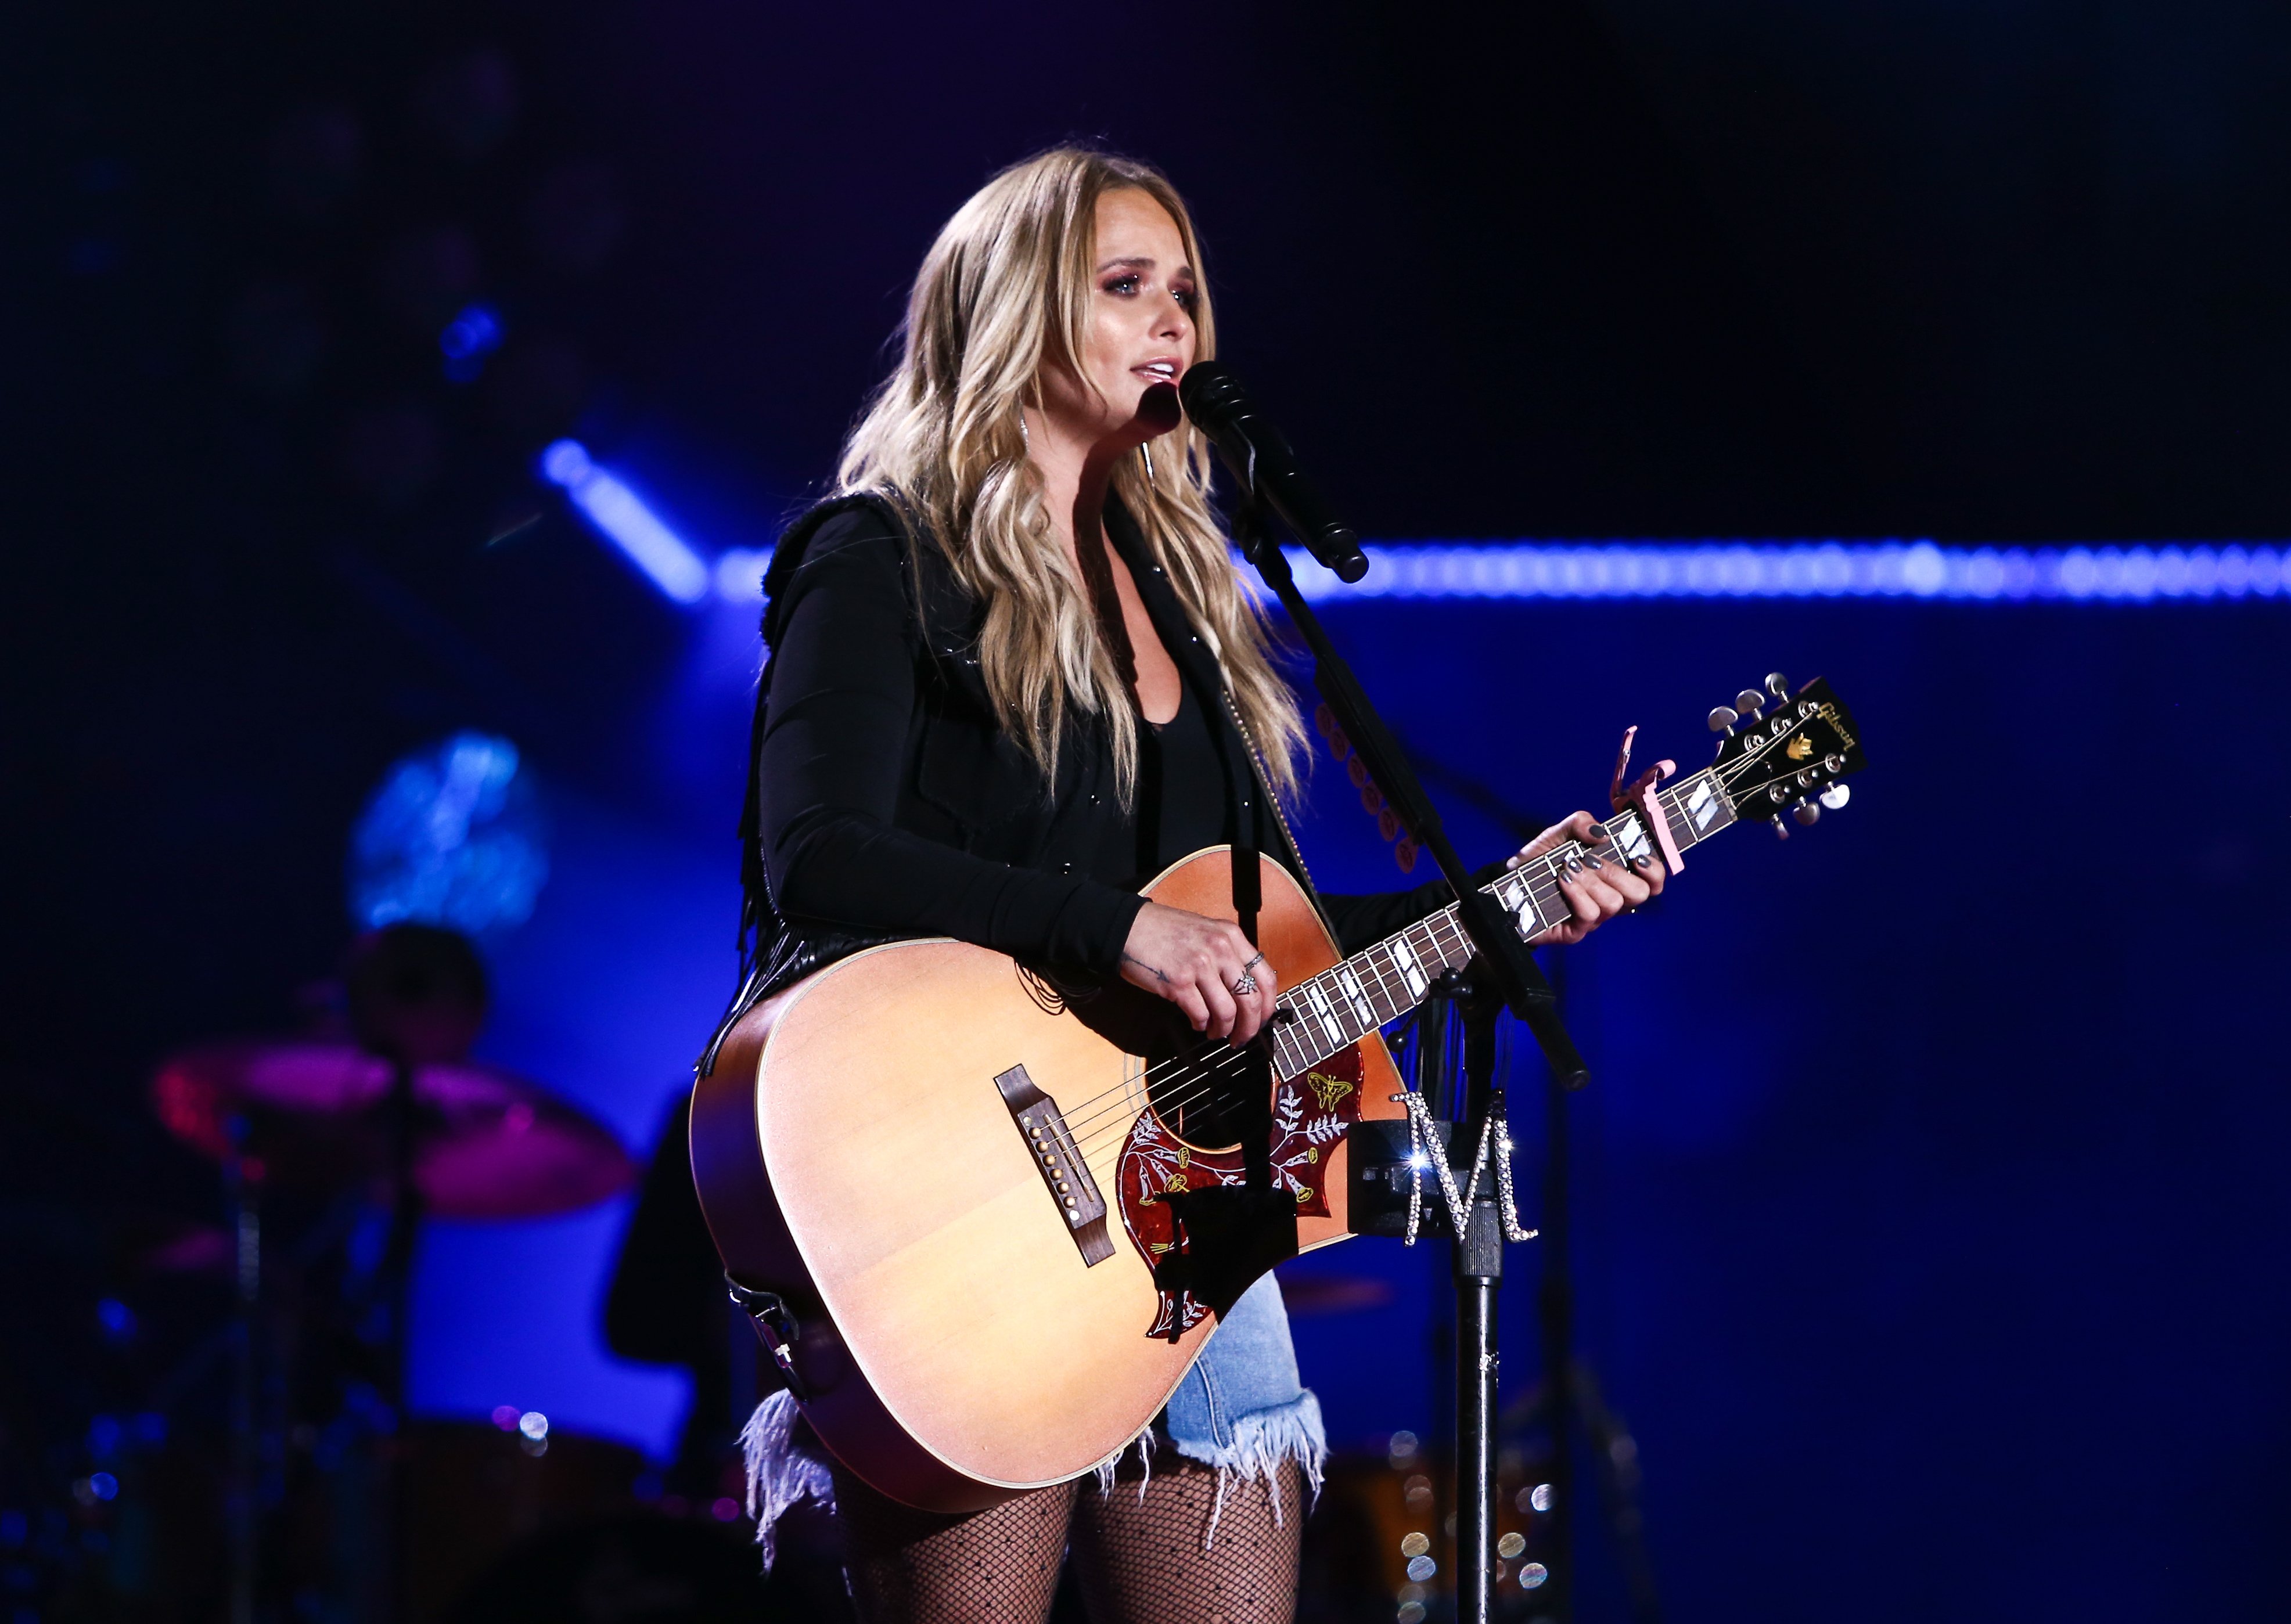 Miranda Lambert performing at the Country Music Hall of Fame and Museum in Nashville, Tennessee | Photo: Getty Images